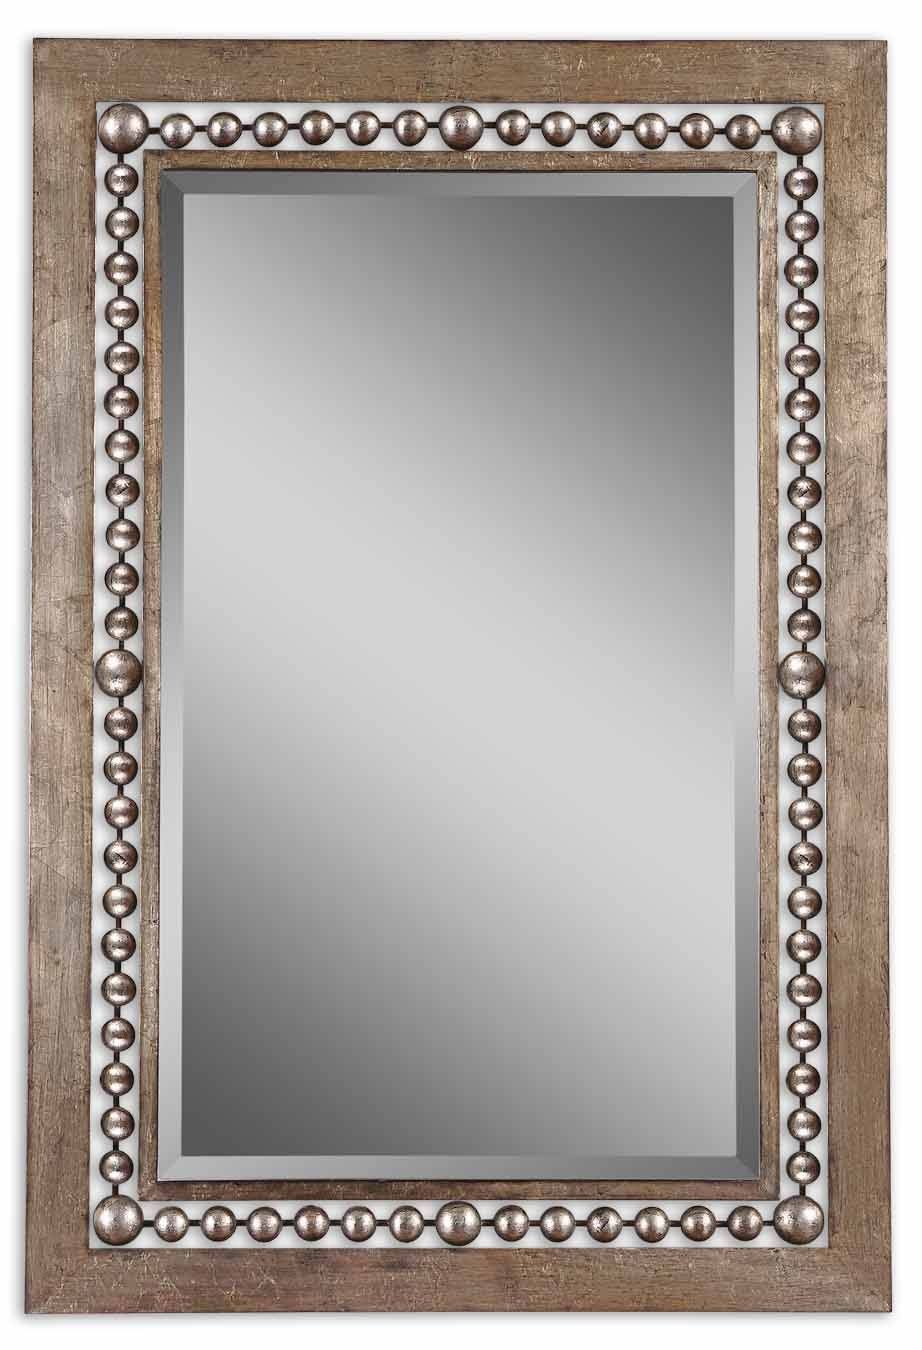 Uttermost Fidda Antique Silver Mirror 13724 With Antique Silver Mirrors (View 2 of 15)